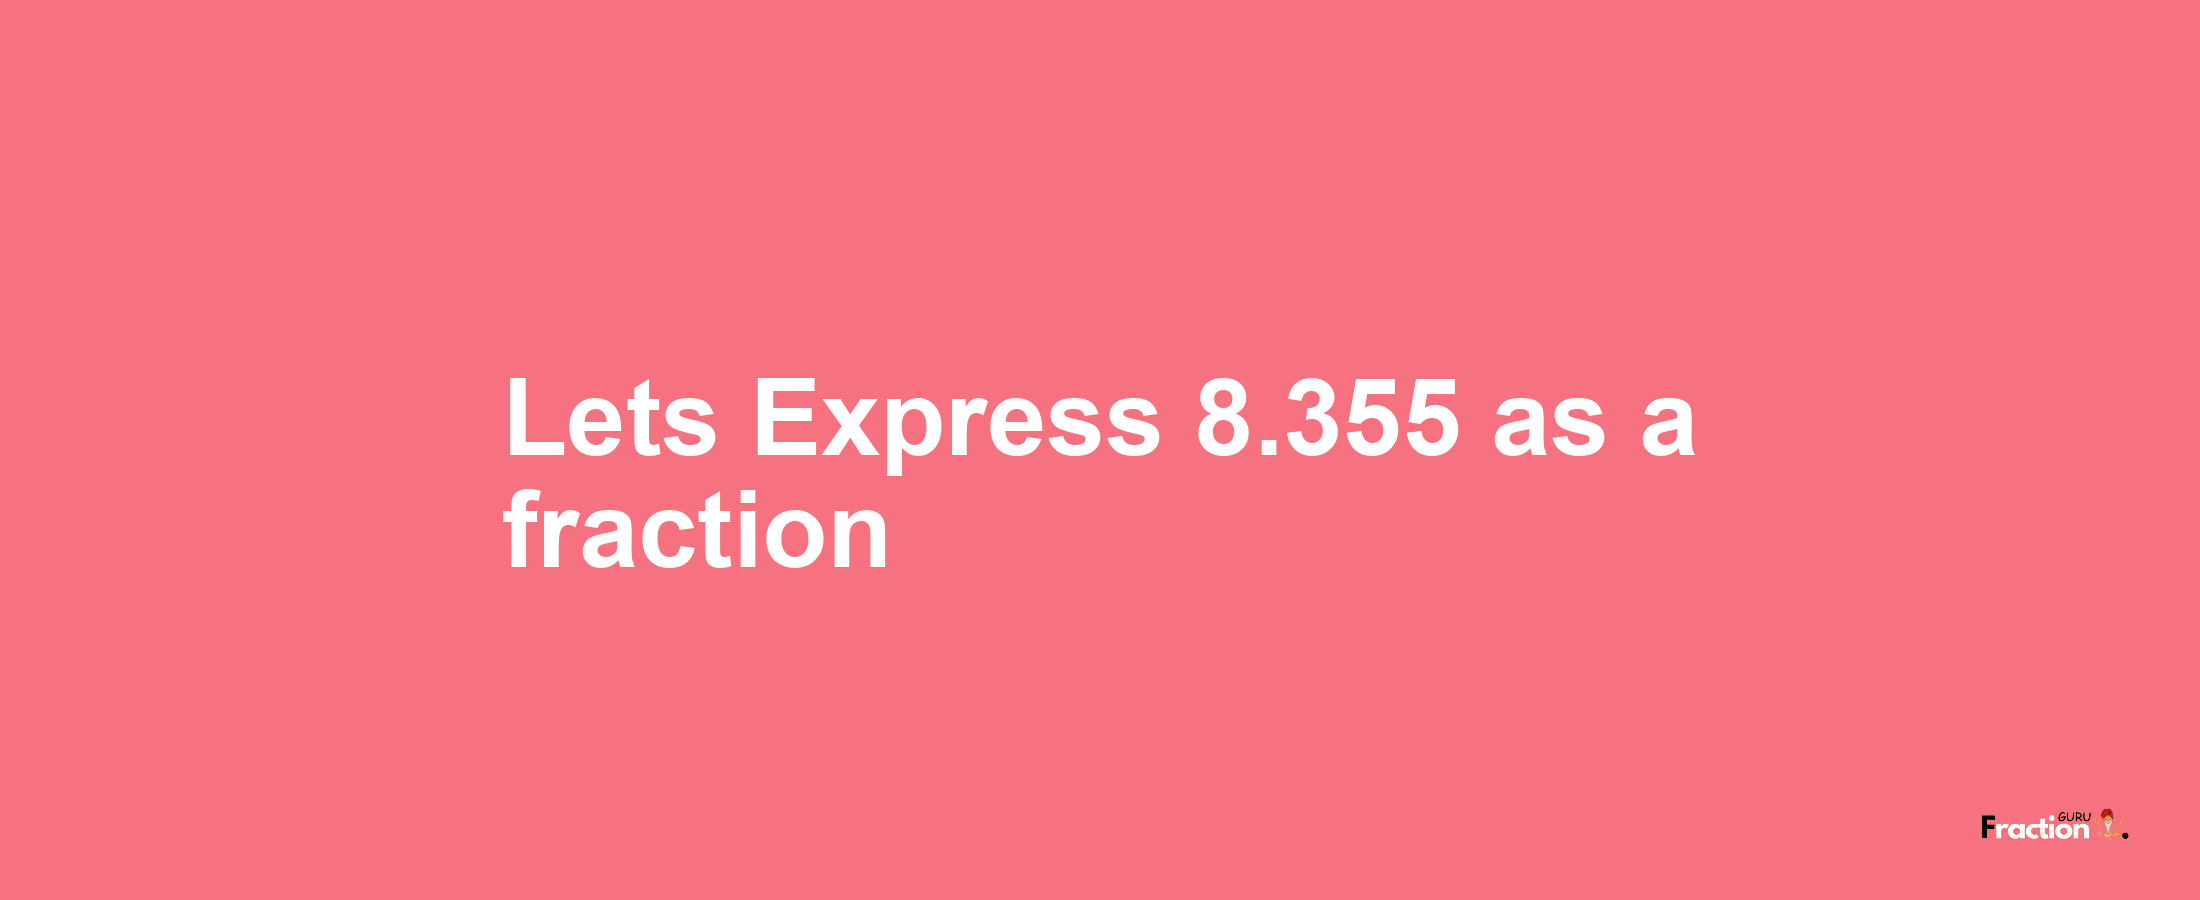 Lets Express 8.355 as afraction